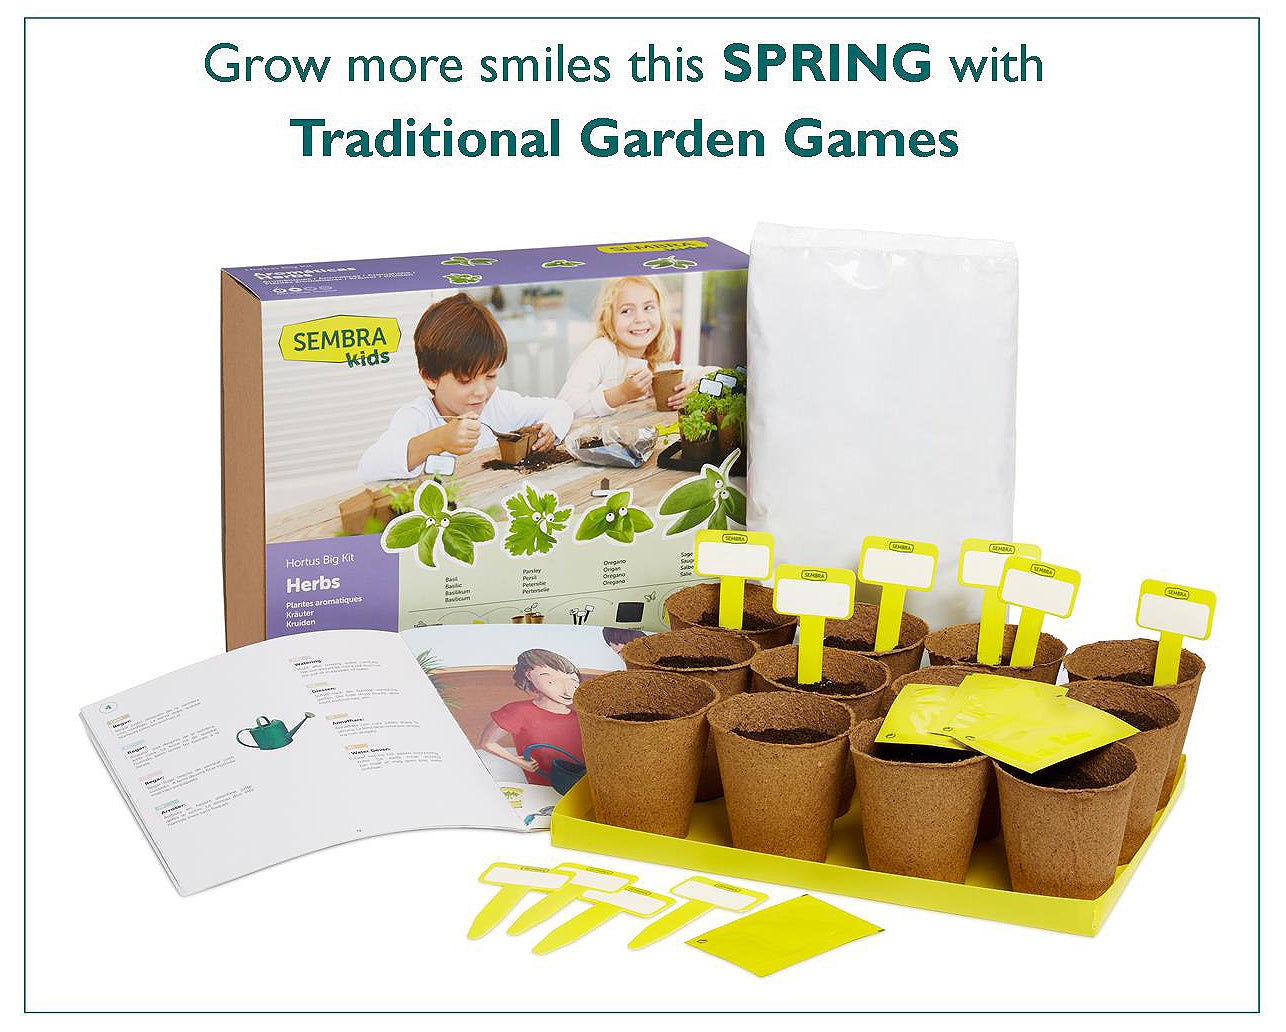 Grow more smiles this SPRING with SEMBRA sow and grow kits